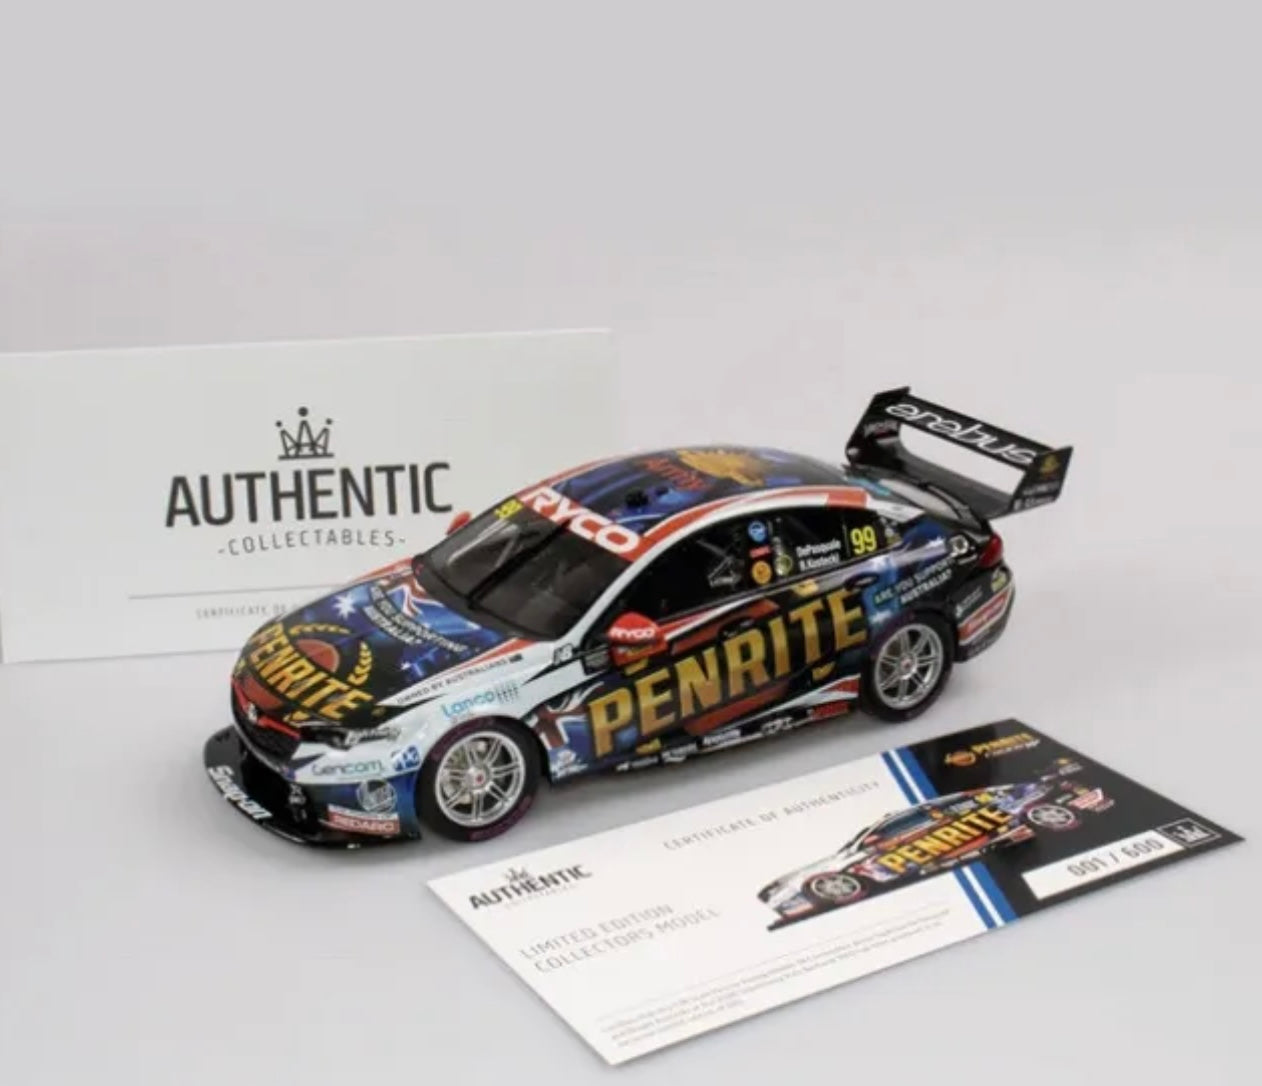 1:18 Anton DePasquale Brodie Kostecki #99 Penrite Racing Holden ZB Commodore 2020 Bathurst Authentic Collectables